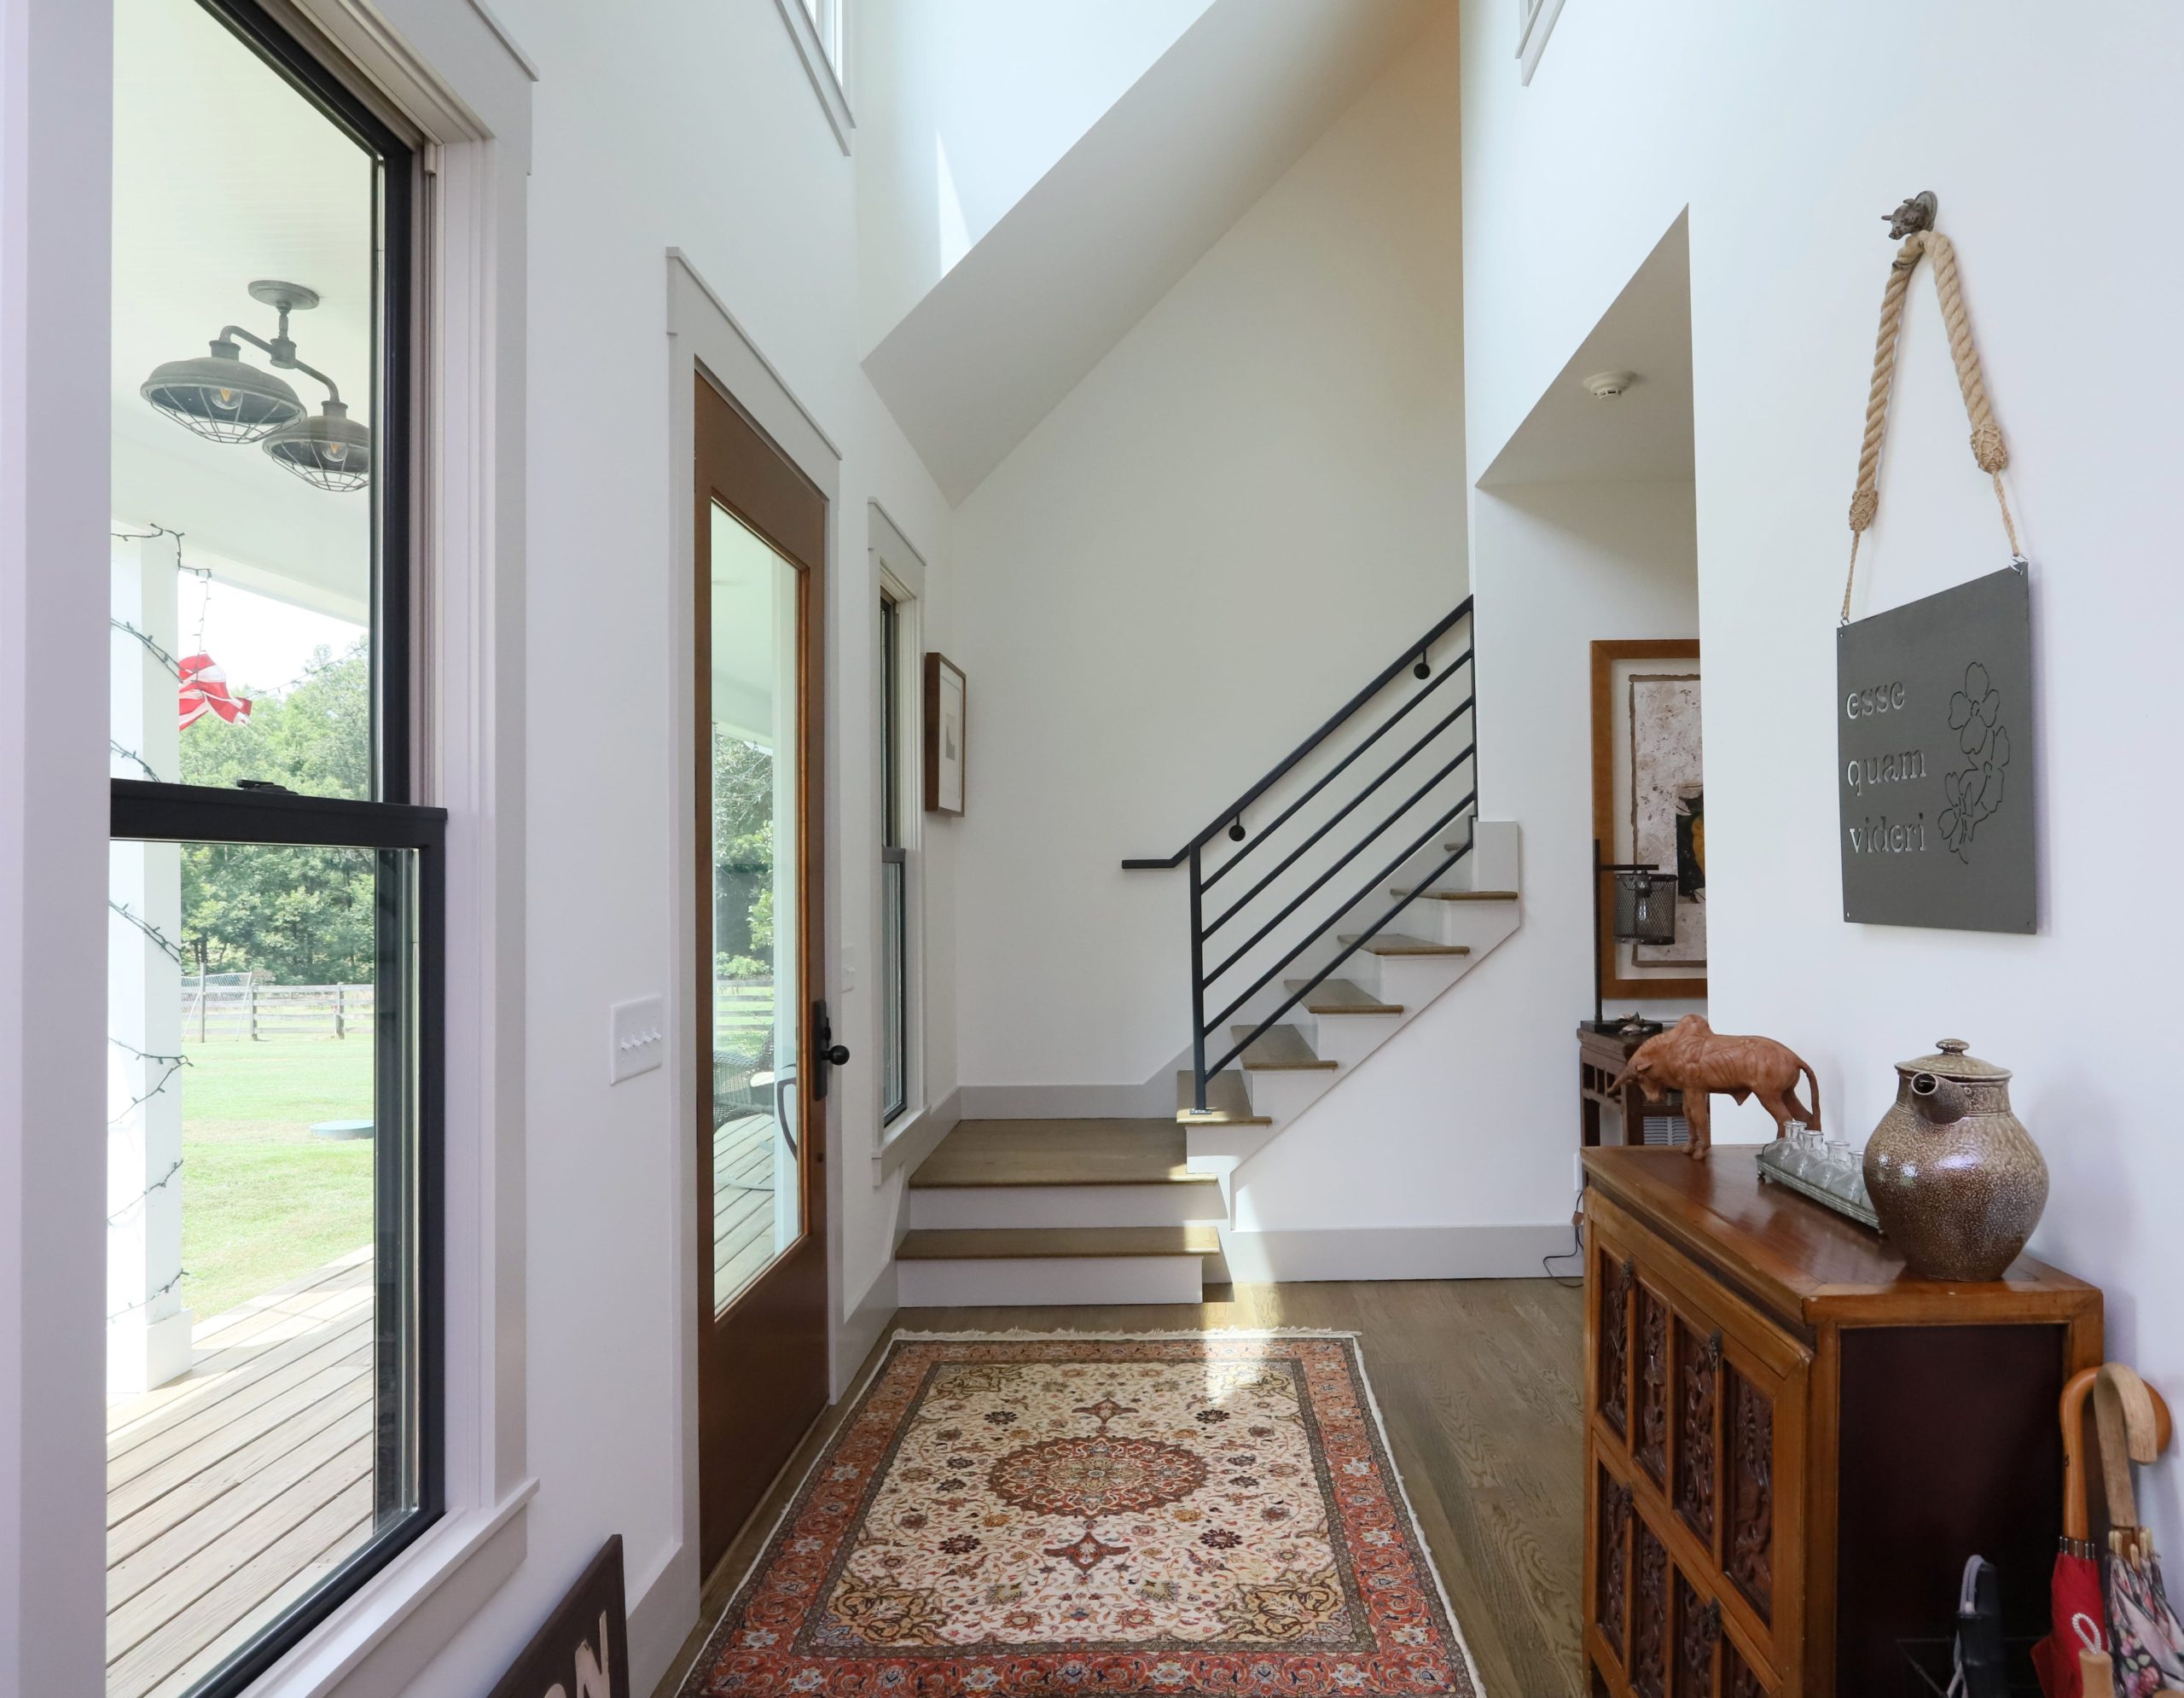 A bright and spacious foyer welcomes natural light and views of the outdoors into the home.